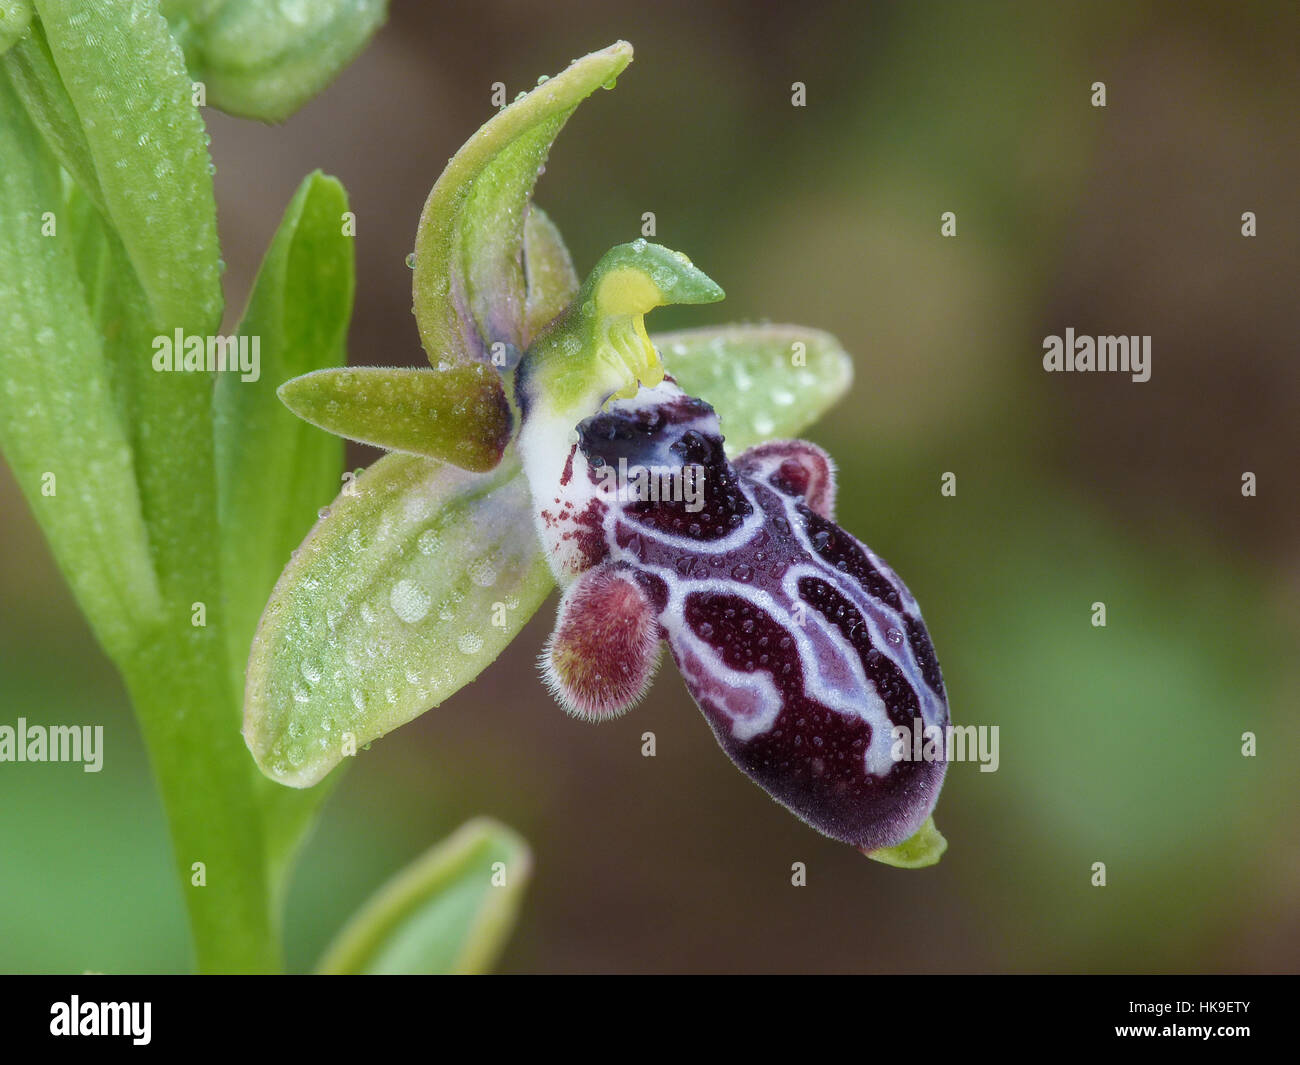 Cyprus Bee Orchid (Ophrys Kotschyi) Close up of flower, Cyprus, March 2015 Stock Photo